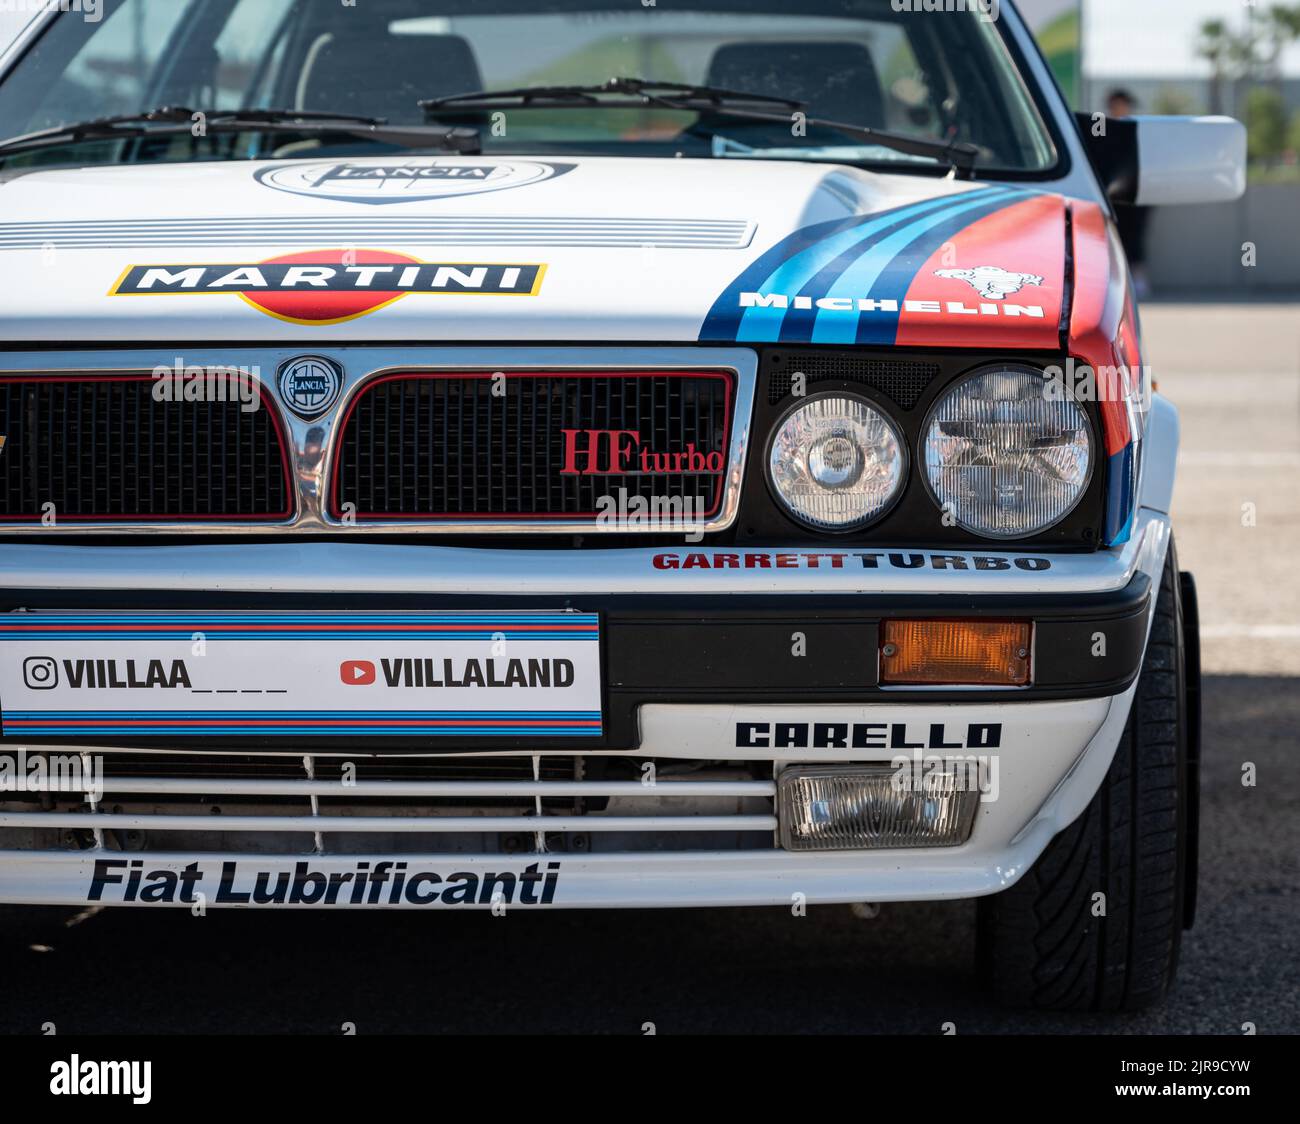 A front view of a classic Martini Lancia Delta HF group B rally car Stock Photo